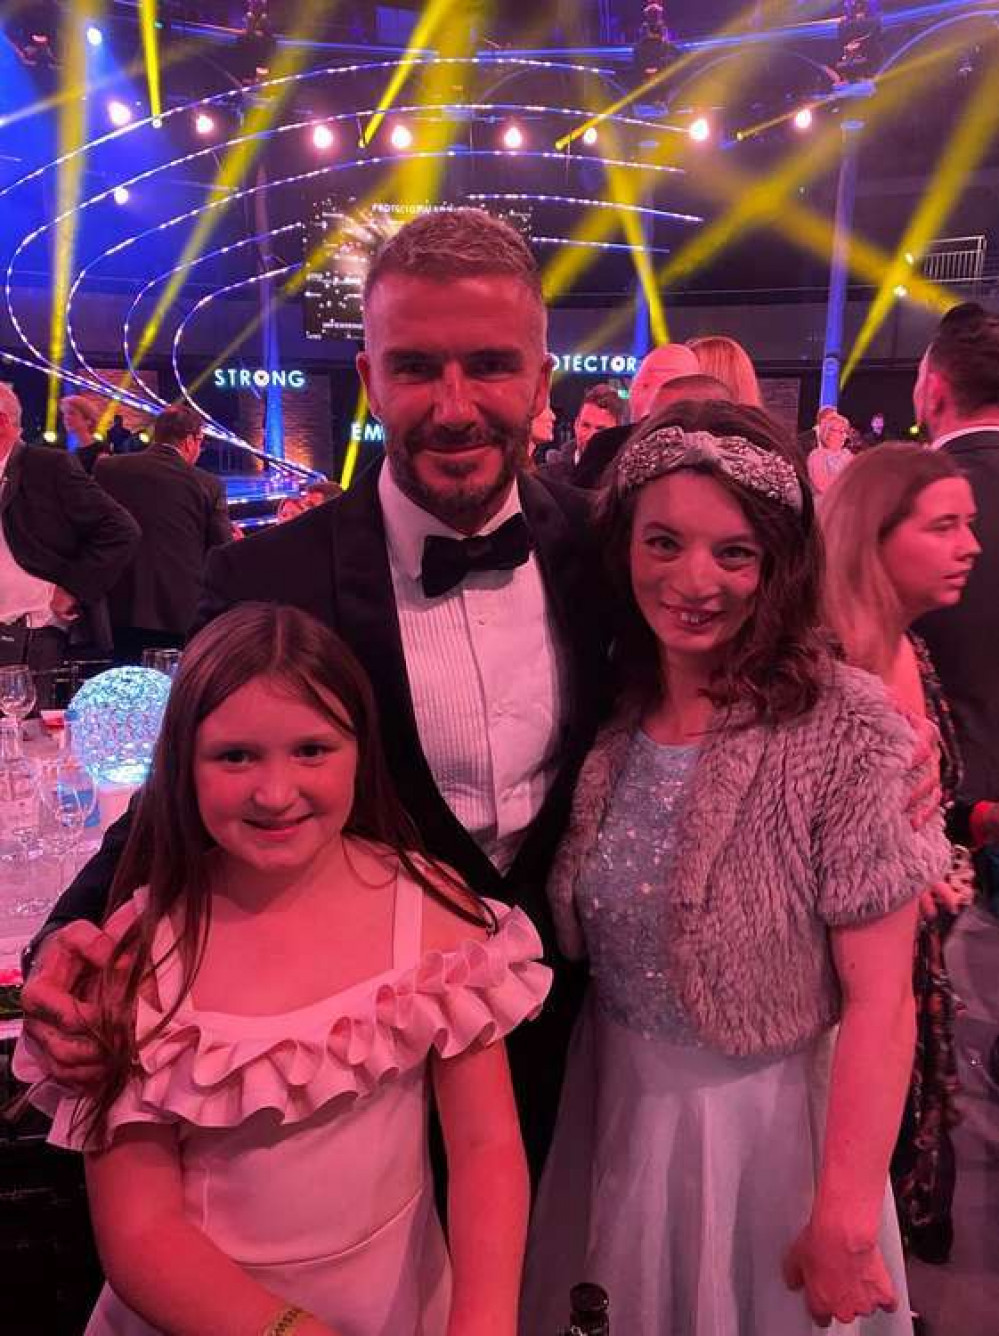 Alice O'Rourke (left) and Philippa George (right) from Park Lane Stables get a quick snap with David Beckham at the Who Cares Wins awards last night (Image: Park Lane Stables)